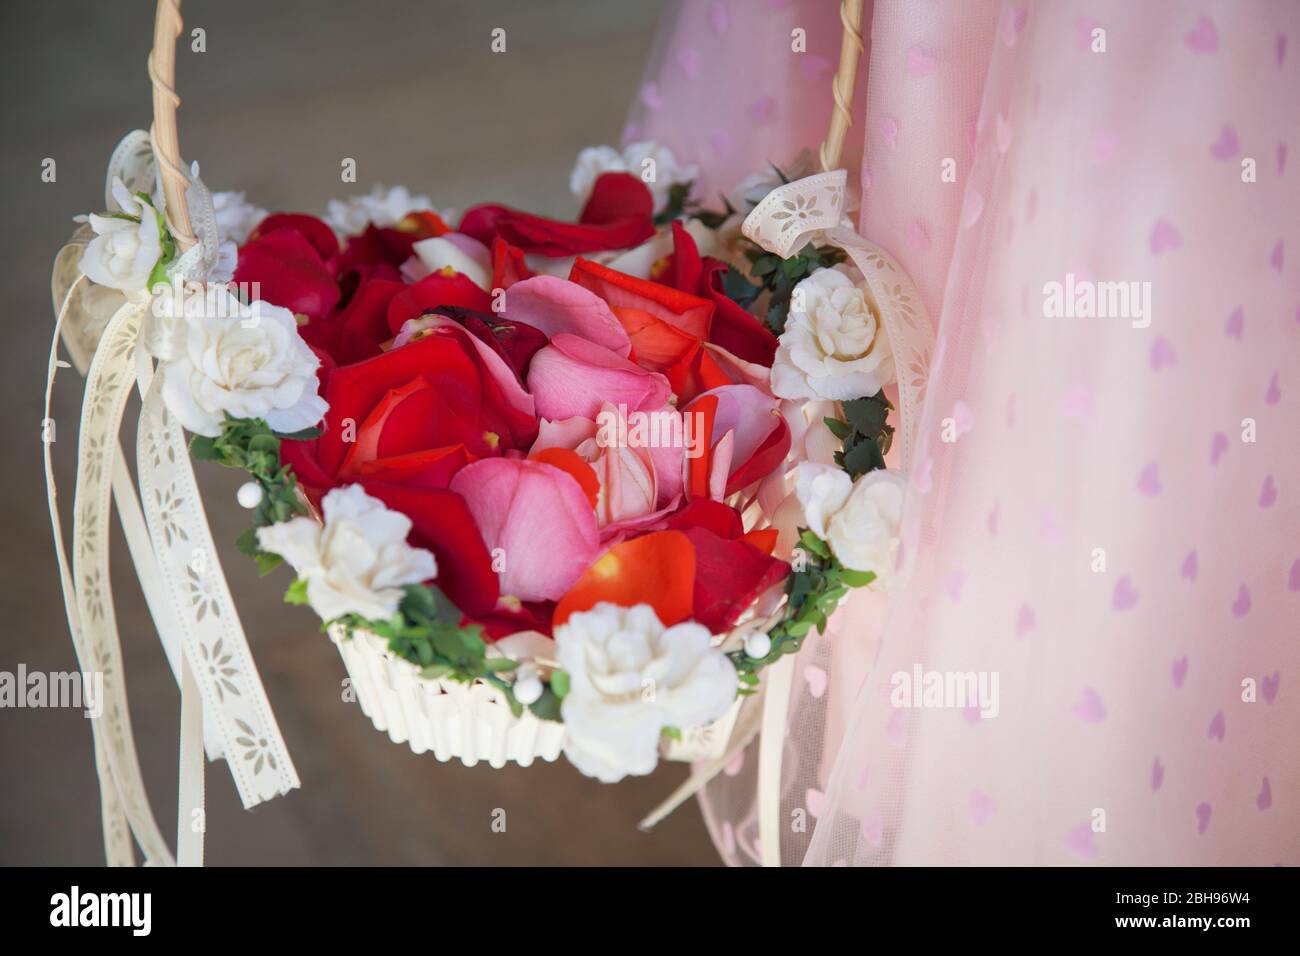 Girl's hand with flower basket, red rose petals Stock Photo